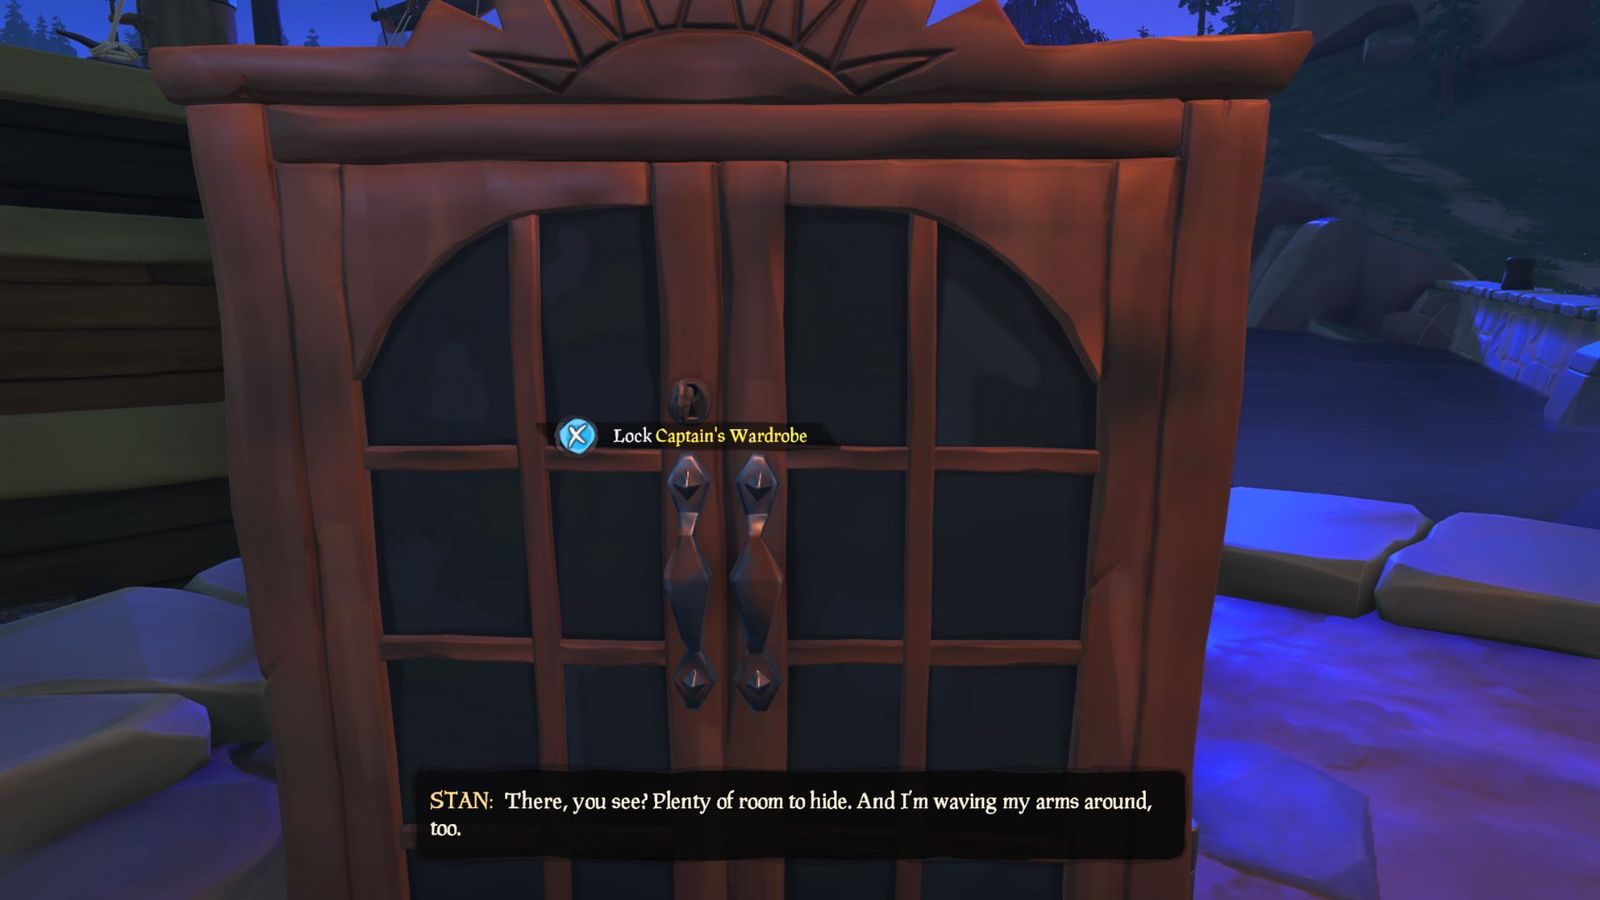 Locking Stan in the wardrobe in Sea of Thieves 'The Quest for Guybrush'